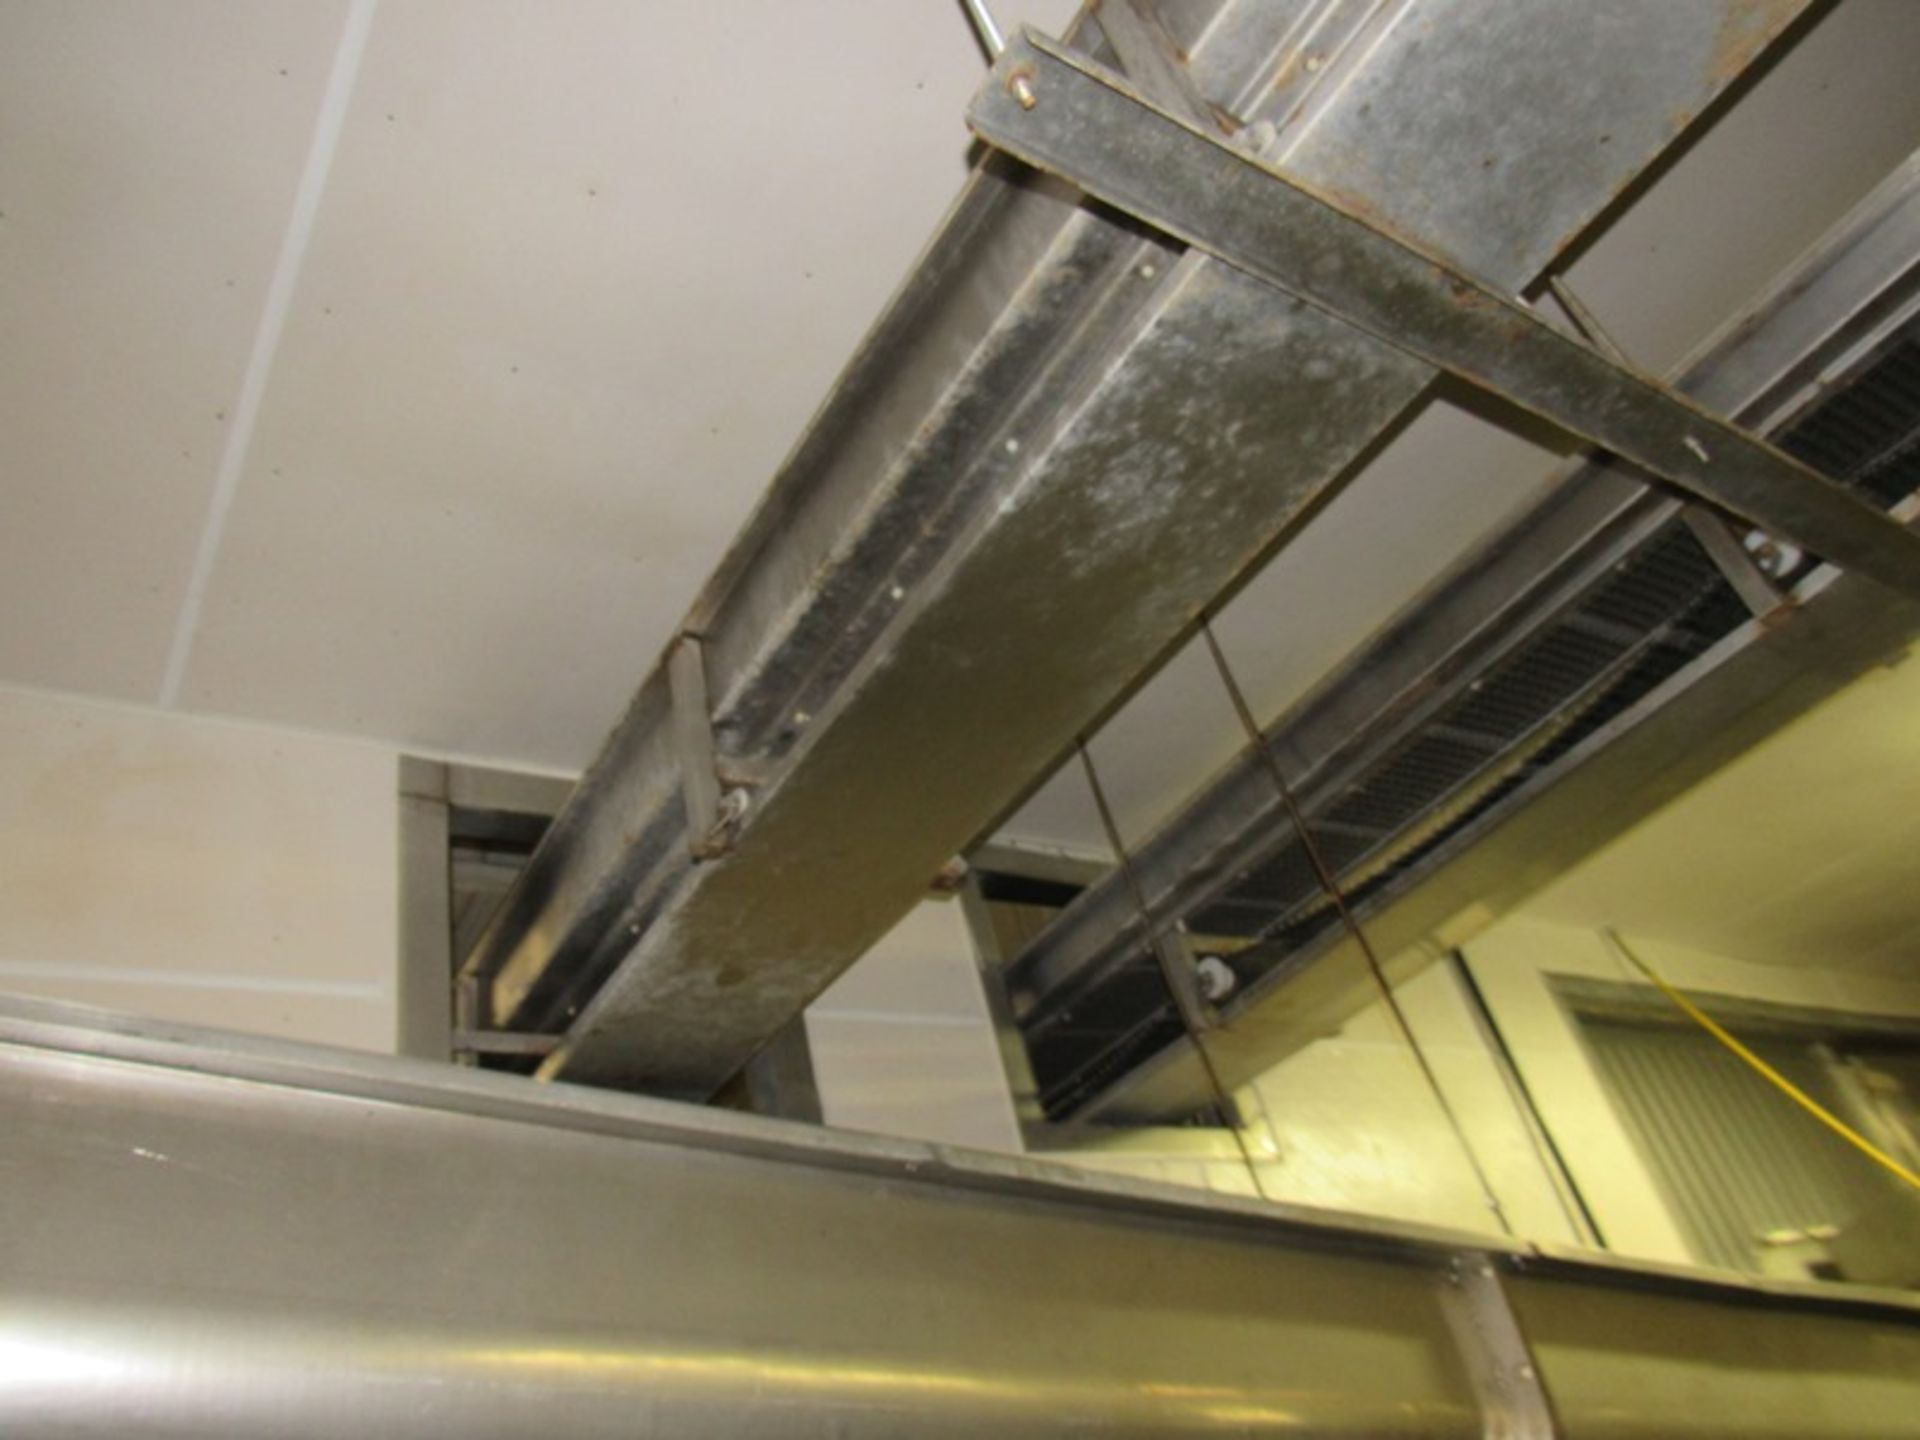 Stainless Steel Ceiling Suspend Conveyor, 6" W X 36' L, 1 h.p. motor (Required Loading Fee $1,000.00 - Image 4 of 6